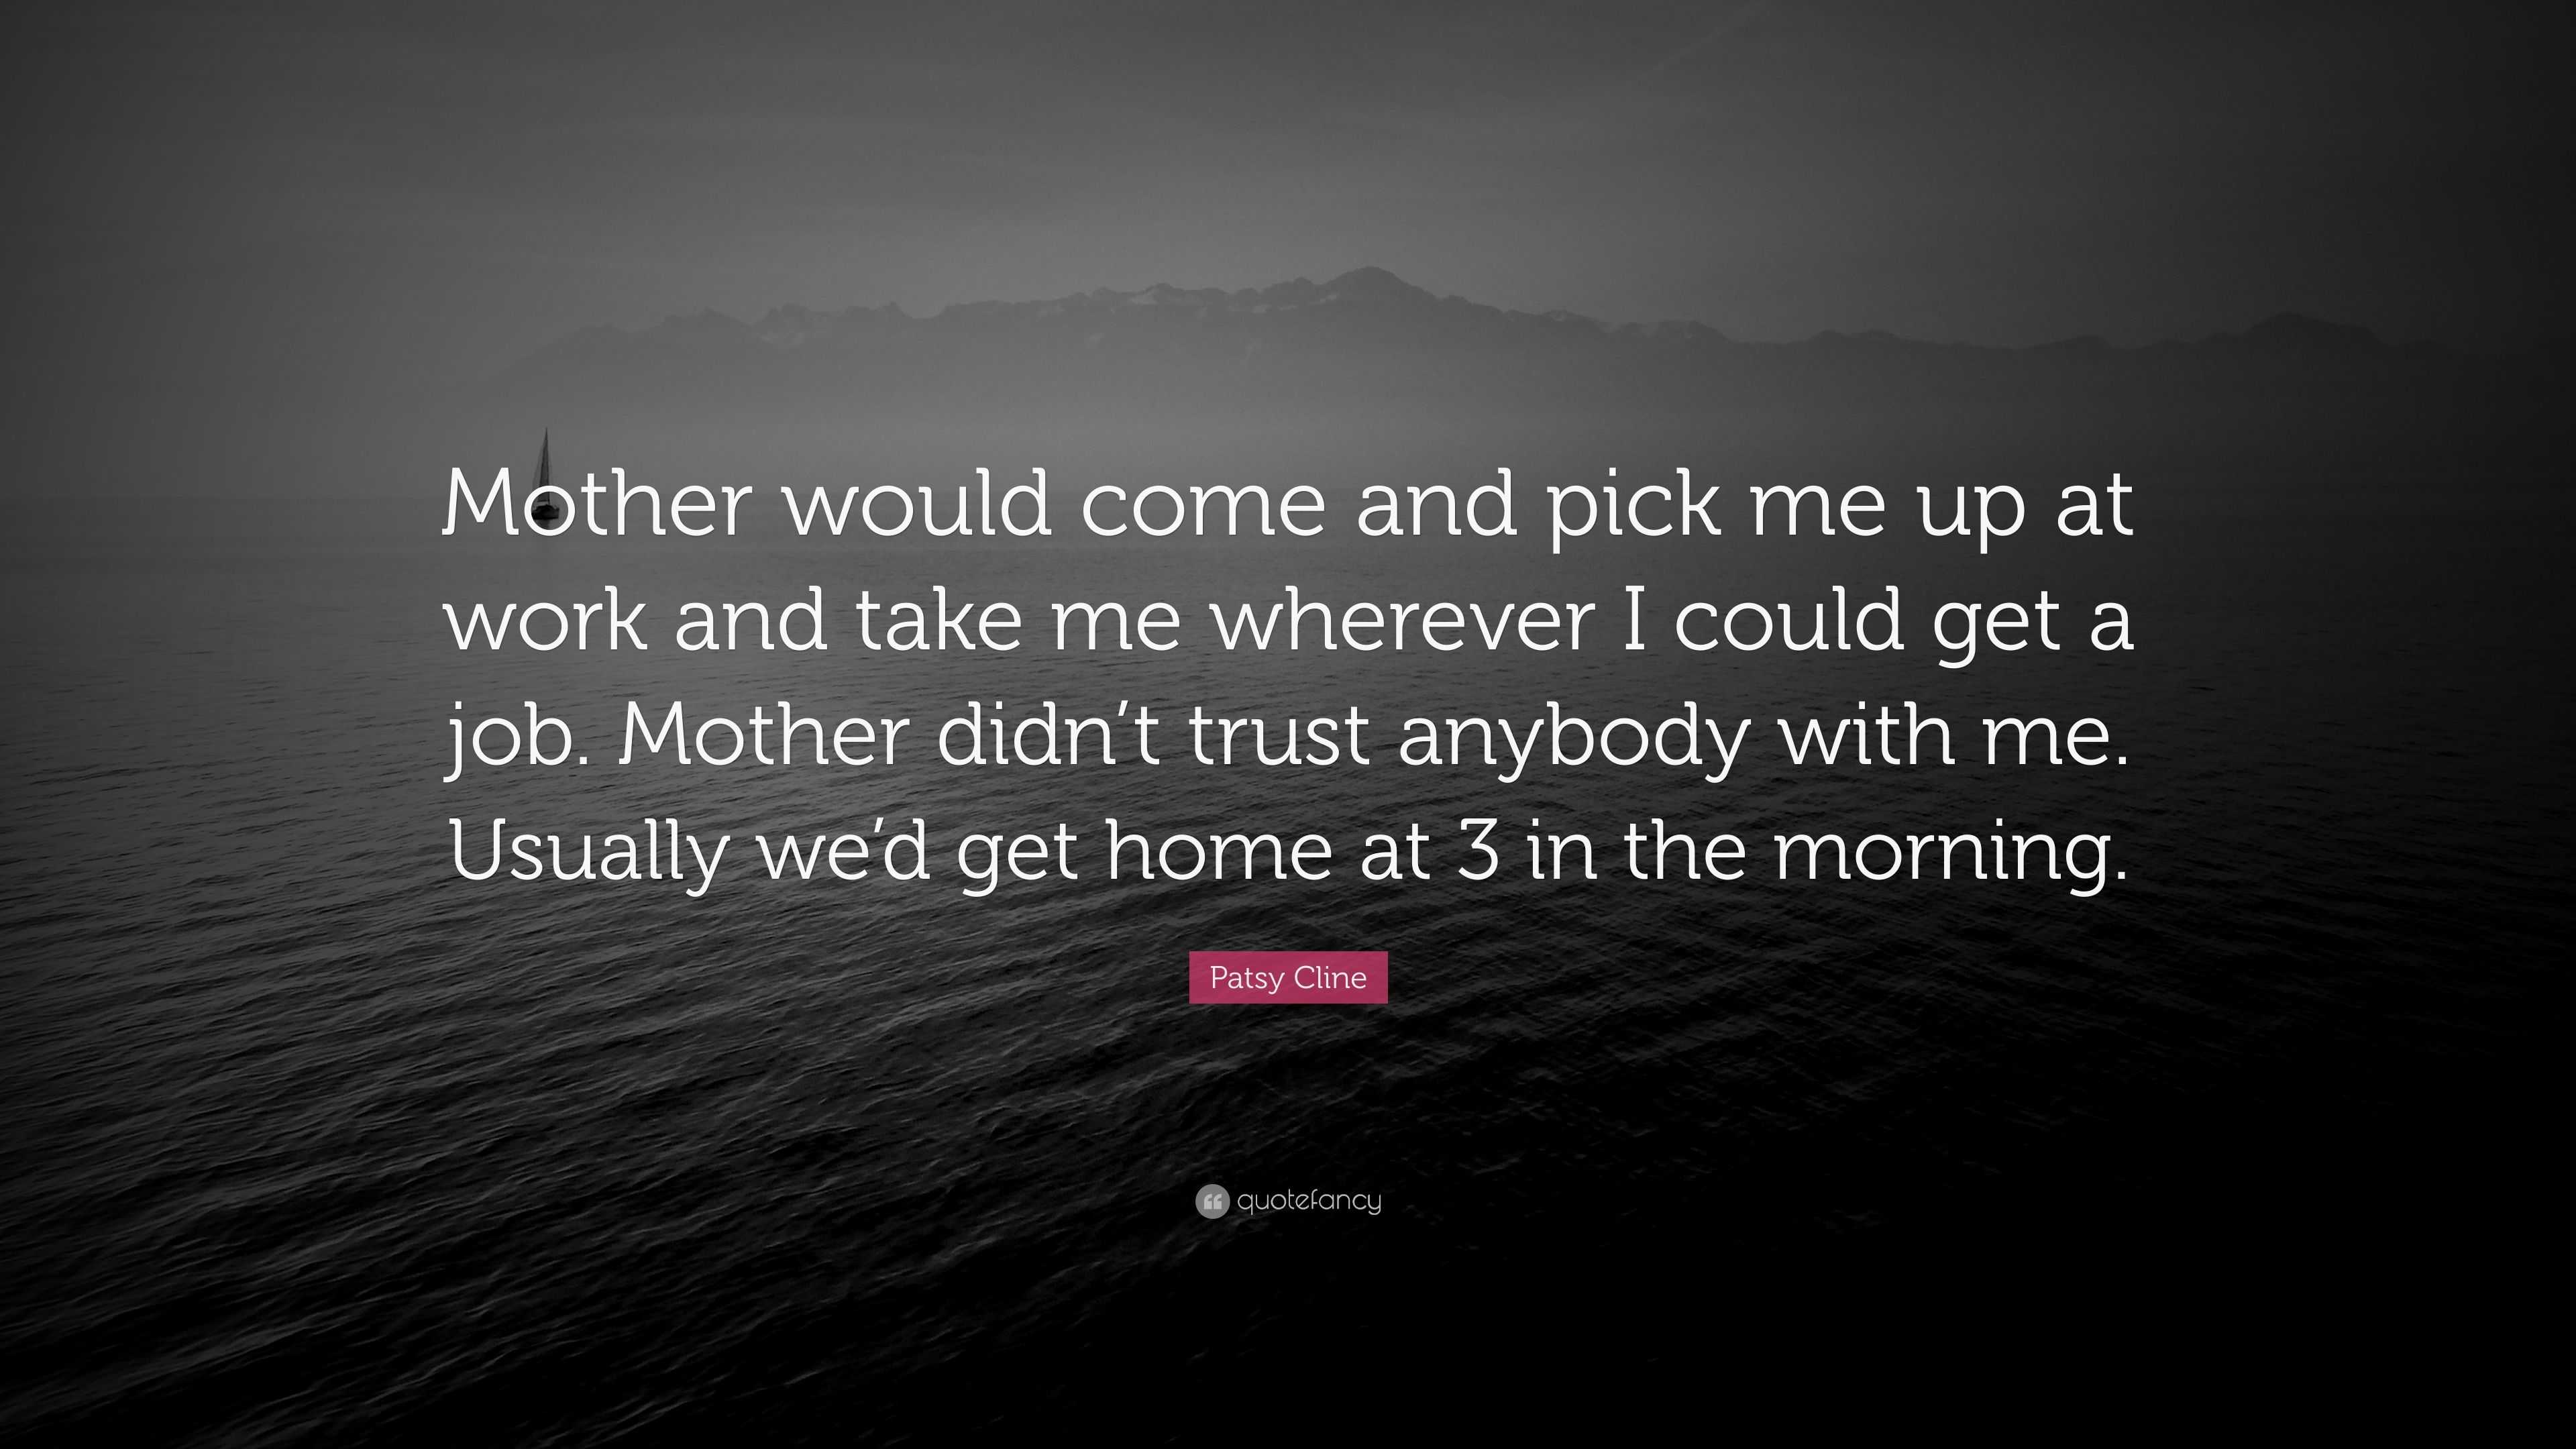 Patsy Cline Quote: “Mother would come and pick me up at work and take ...